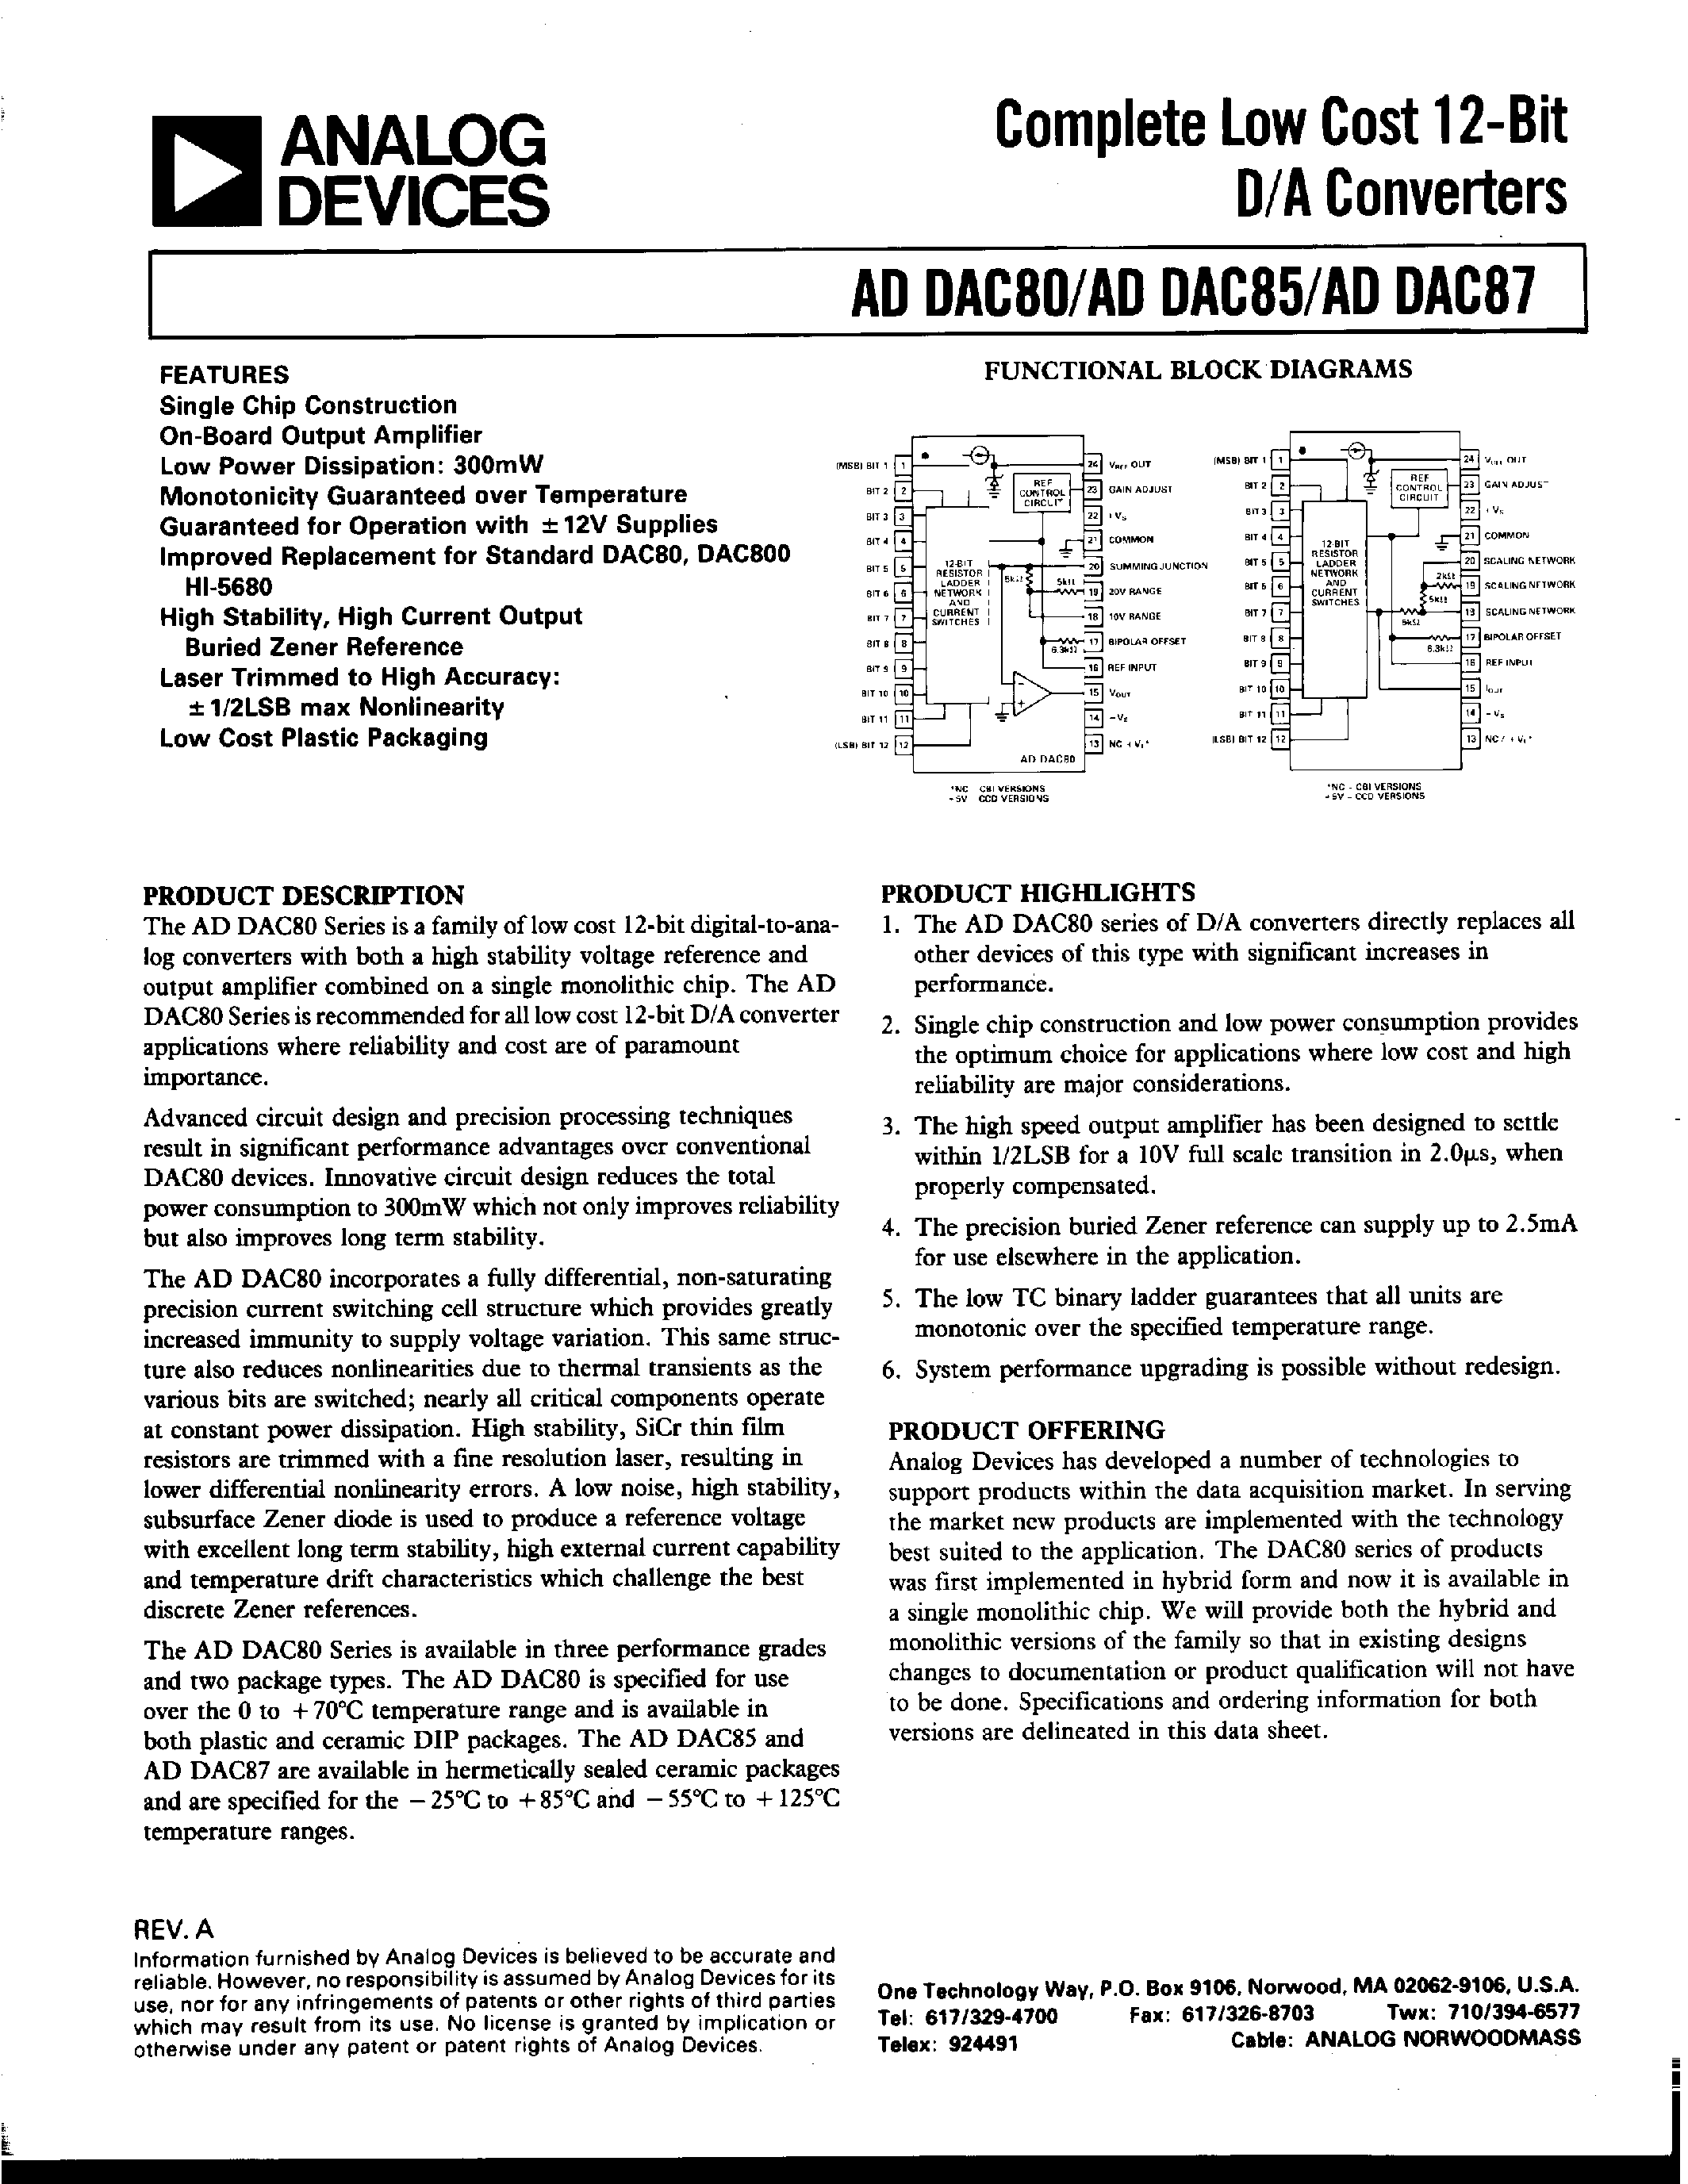 Datasheet ADDAC80-CCD-I - COMPLETE LOW COST 12-BIT D/A CONVERTERS page 1